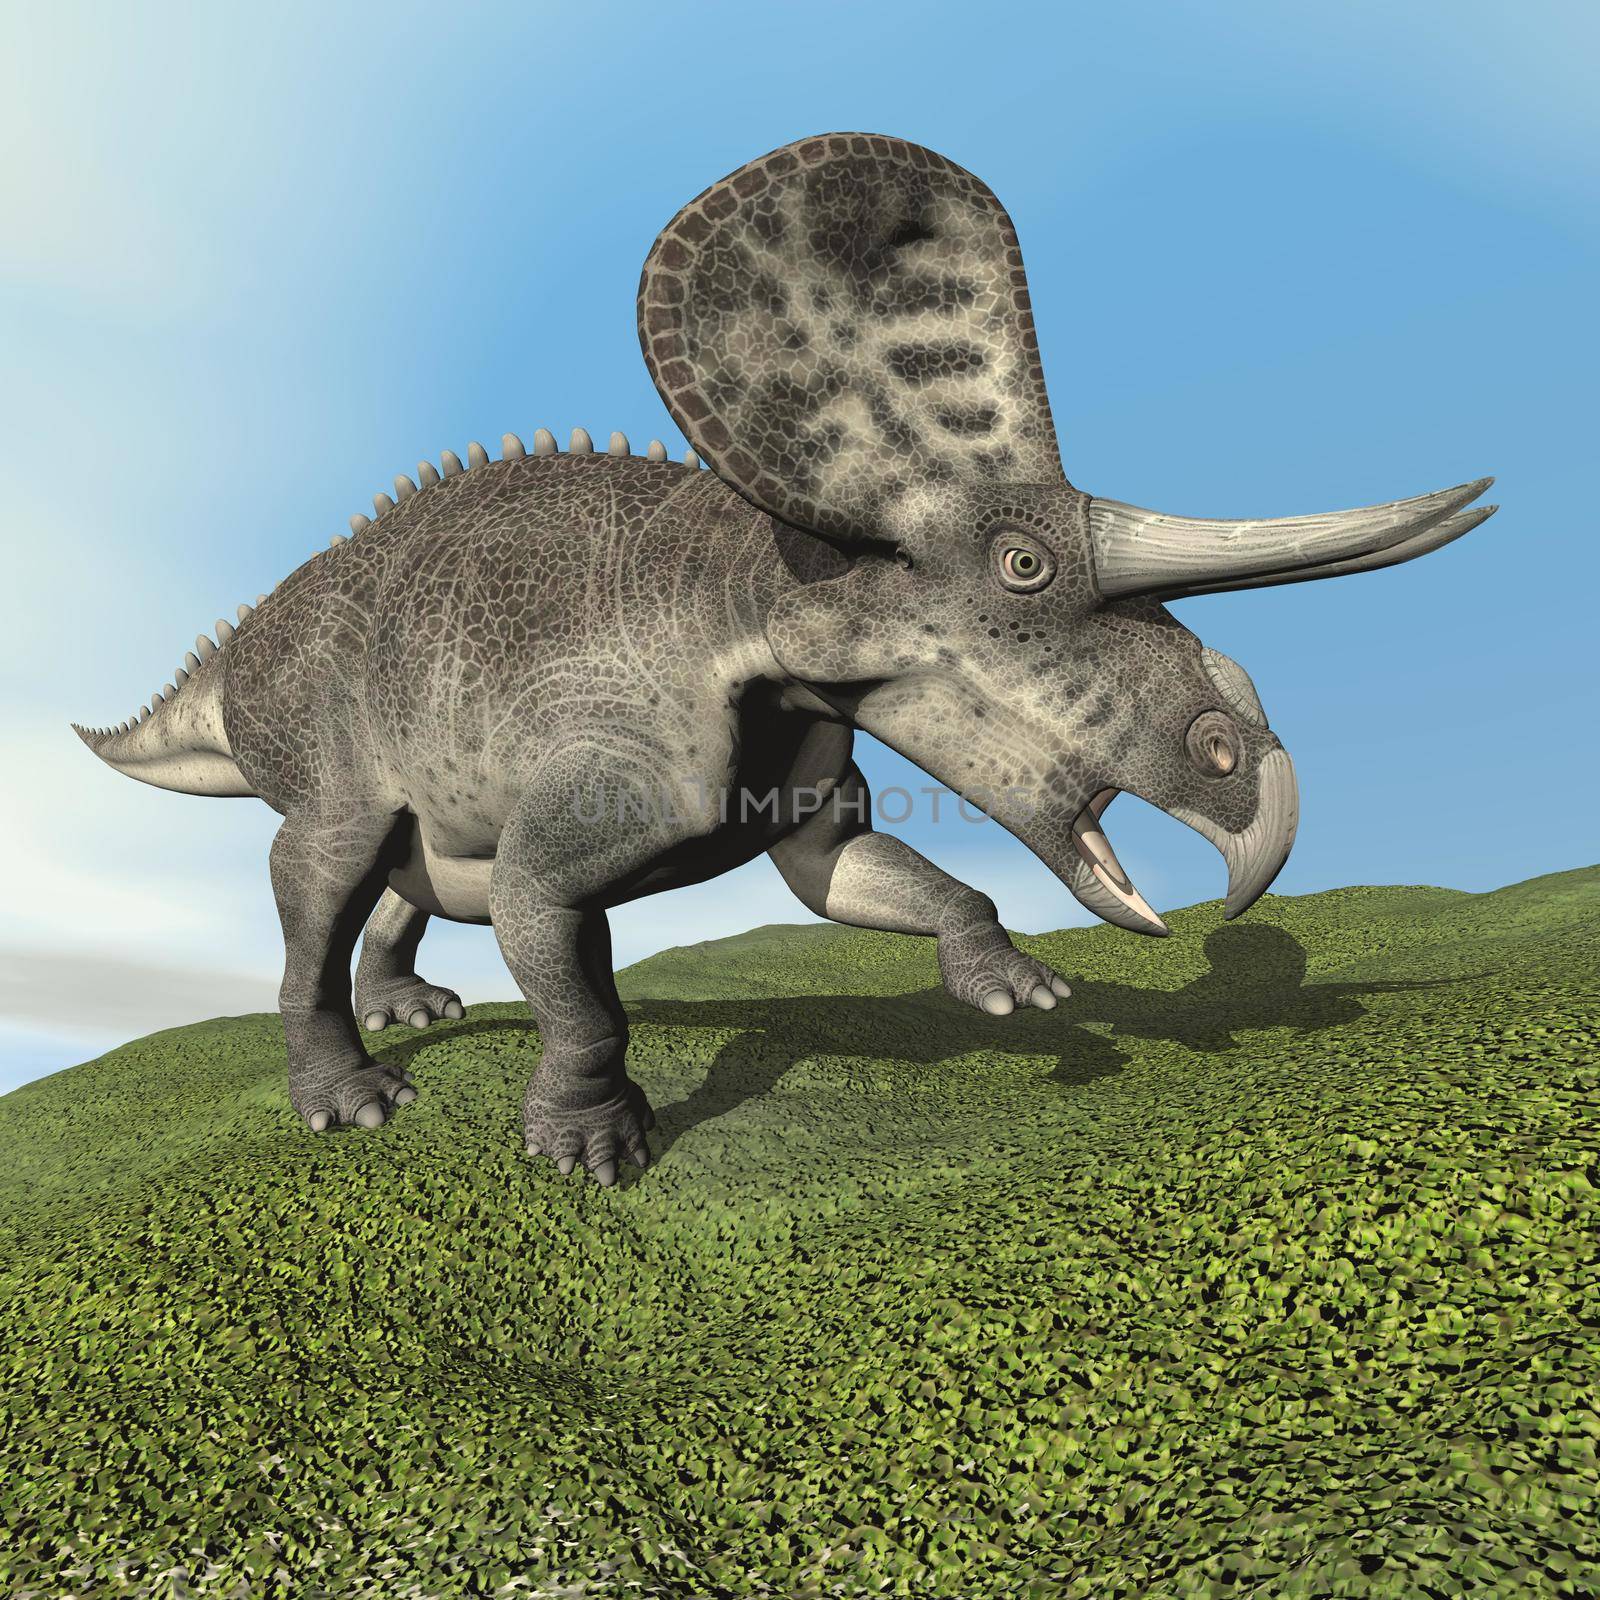 Zuniceratops dinosaur walking on the grass by day - 3D render